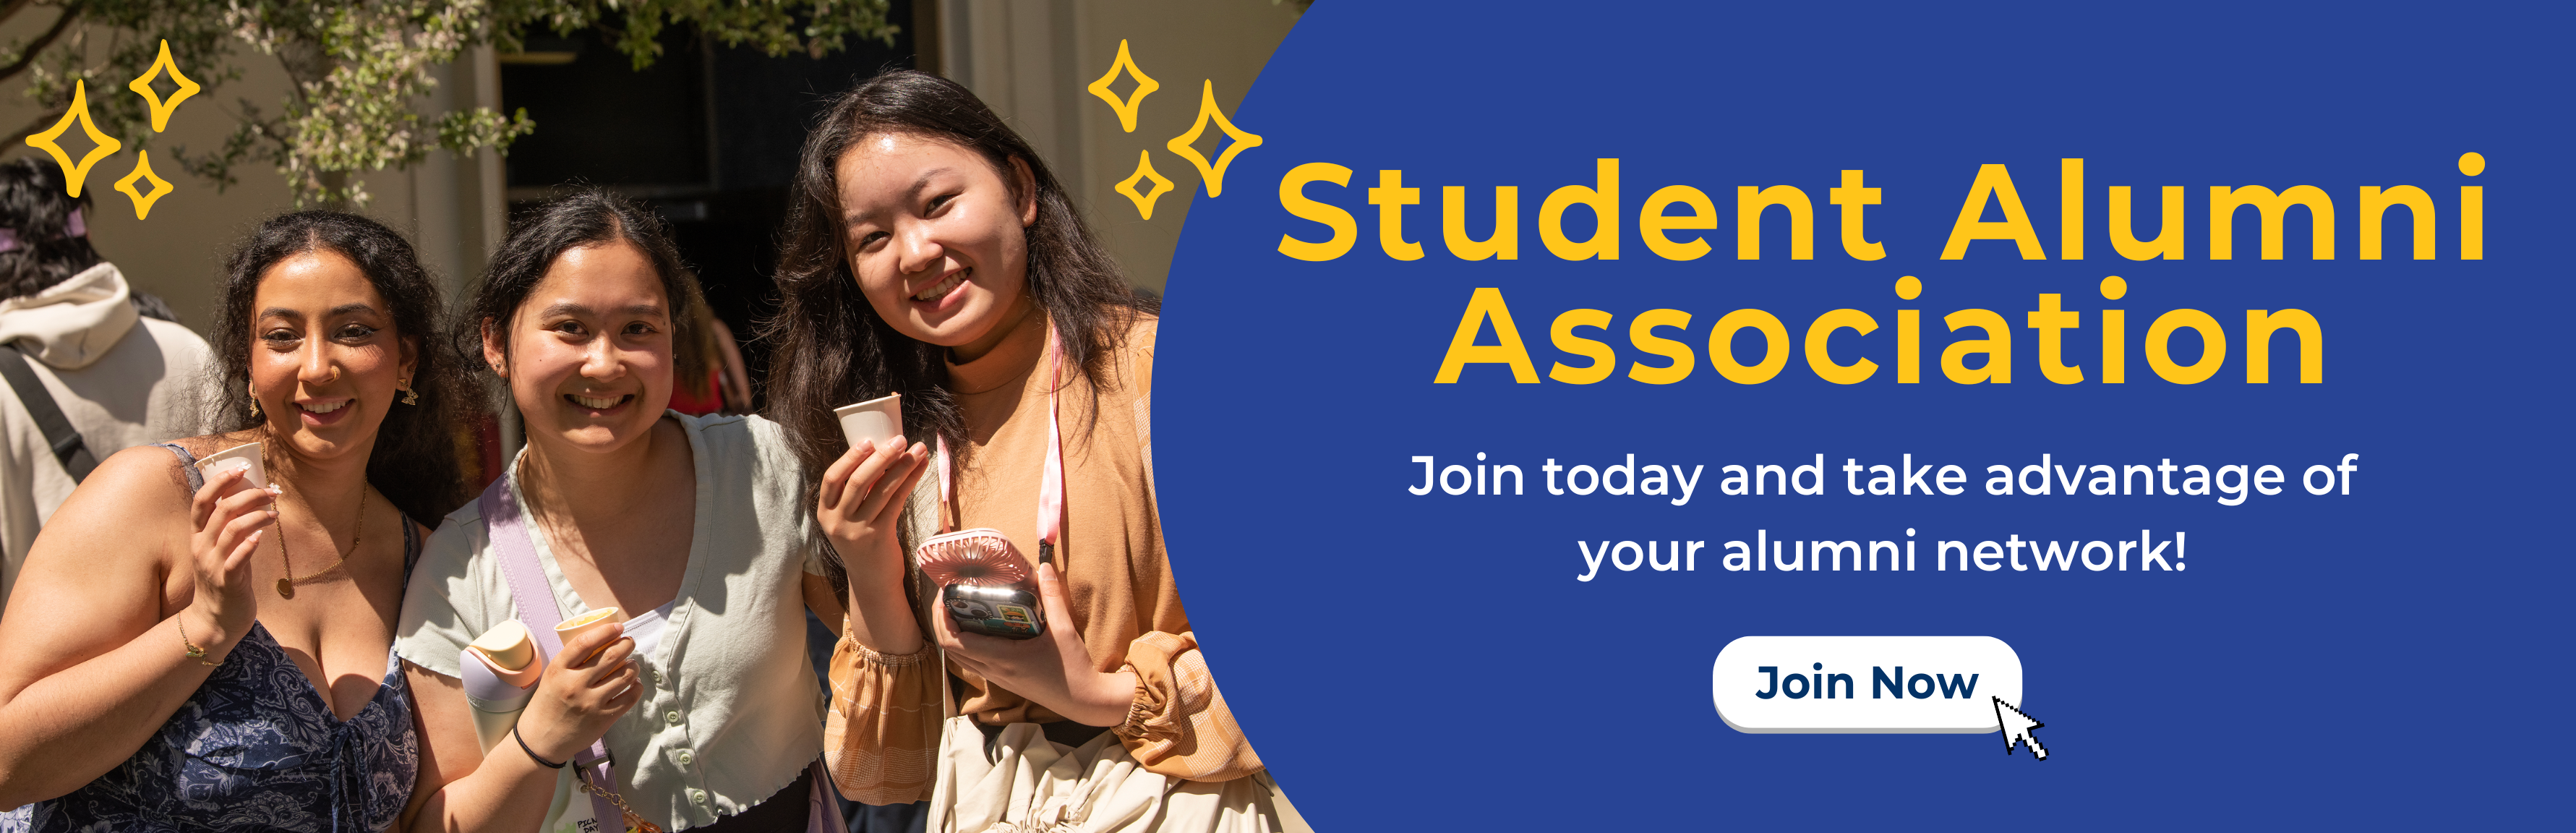 Become a member of the Student Alumni Association!